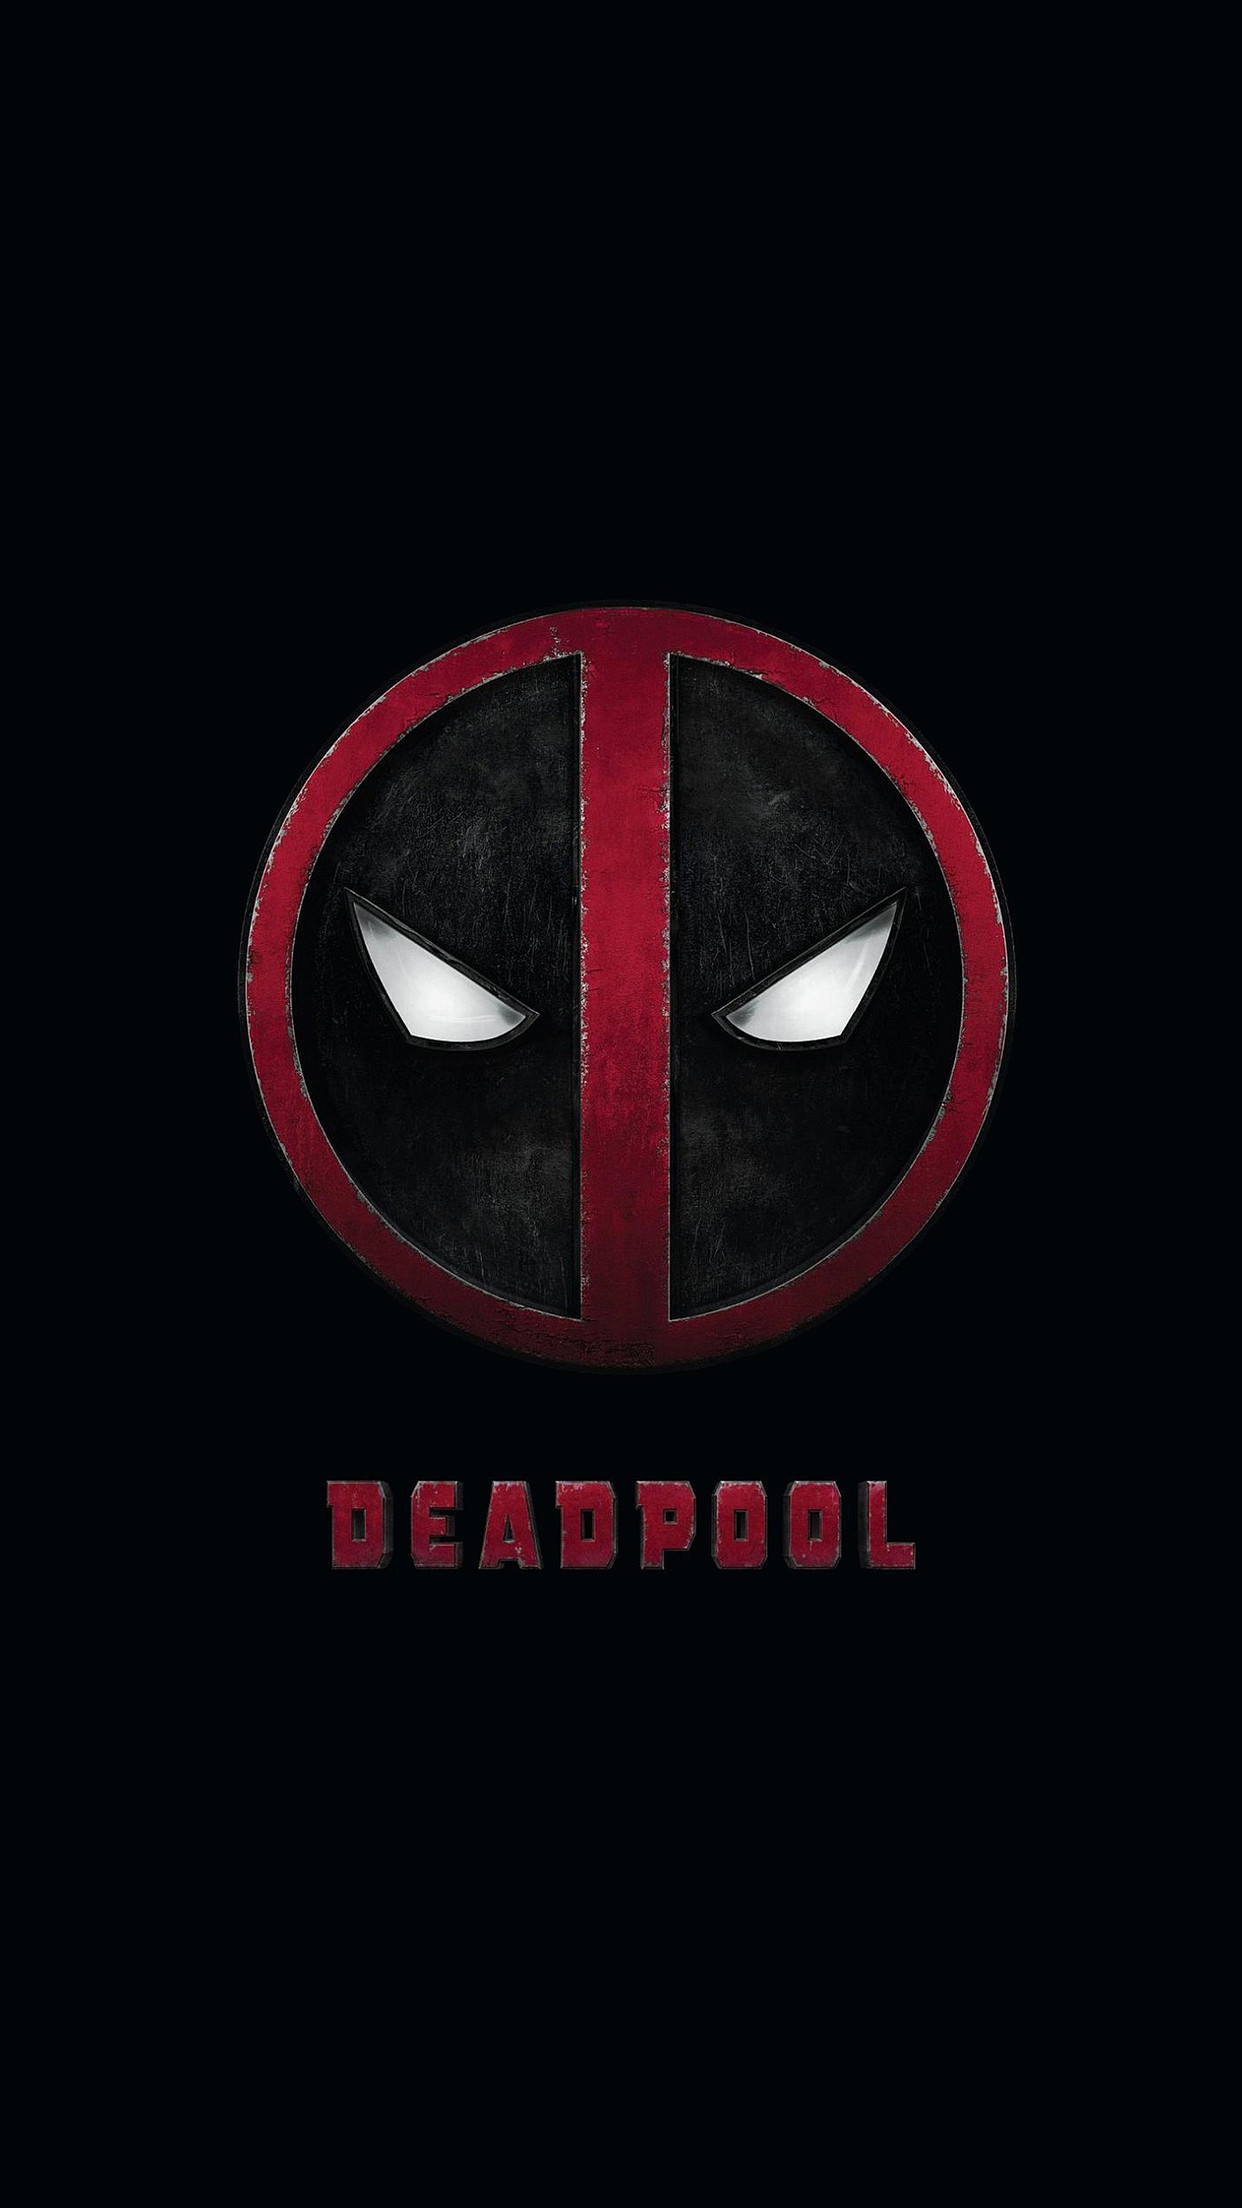 Image for Deadpool Iphone Wallpaper For Android #95y92